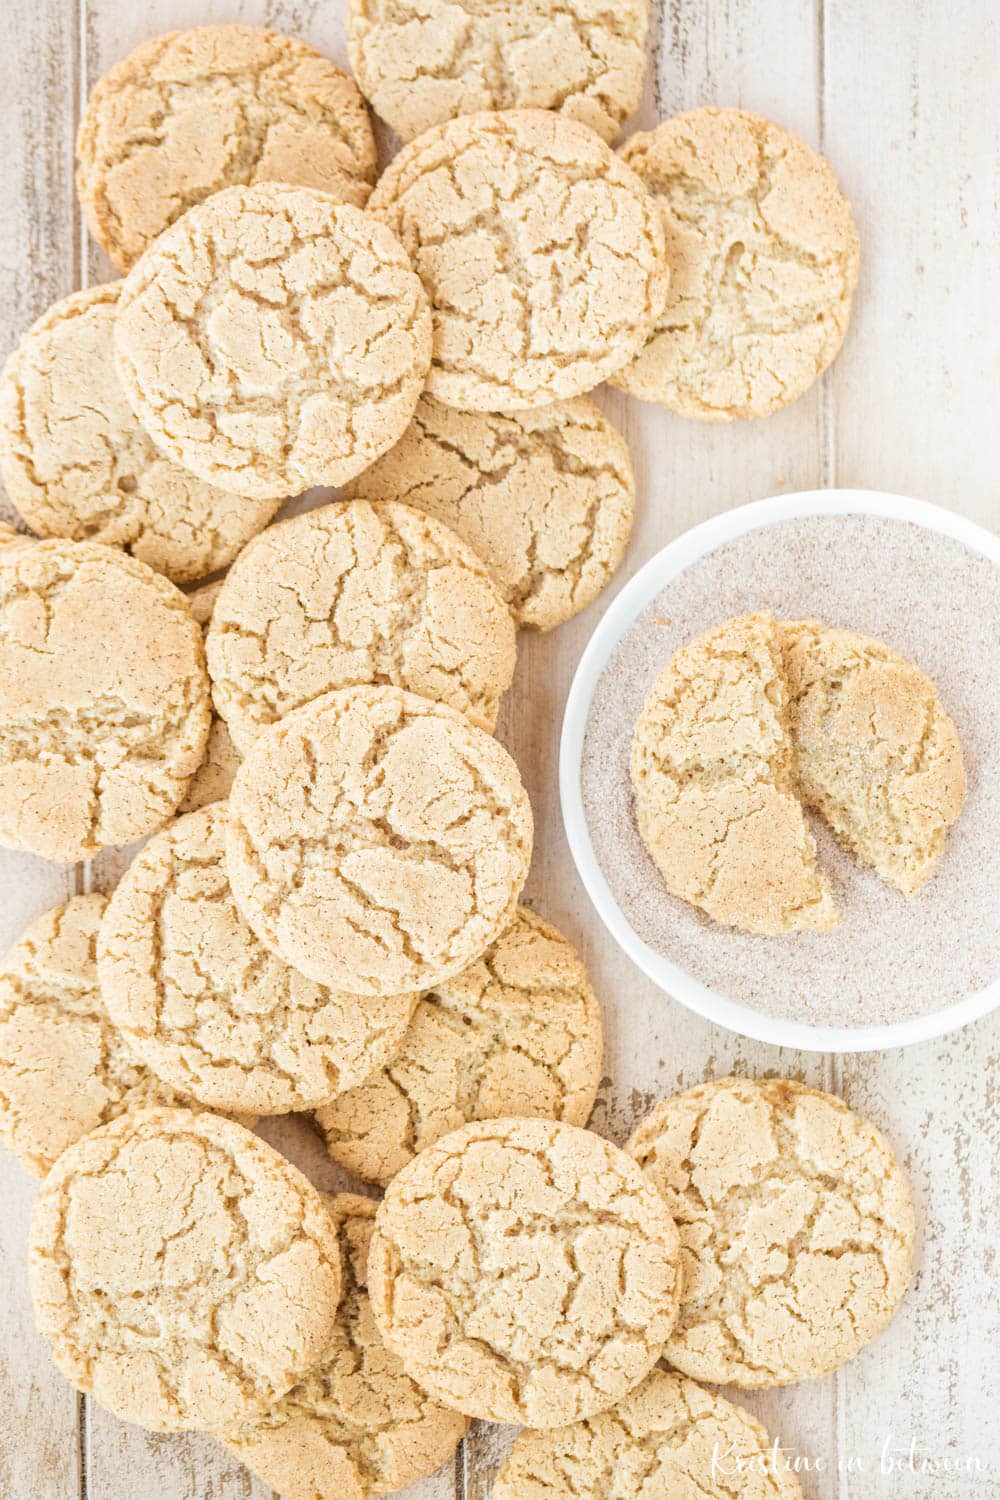 Cookies piled up on a white wooden table with one sitting in a bowl of cinnamon and sugar.